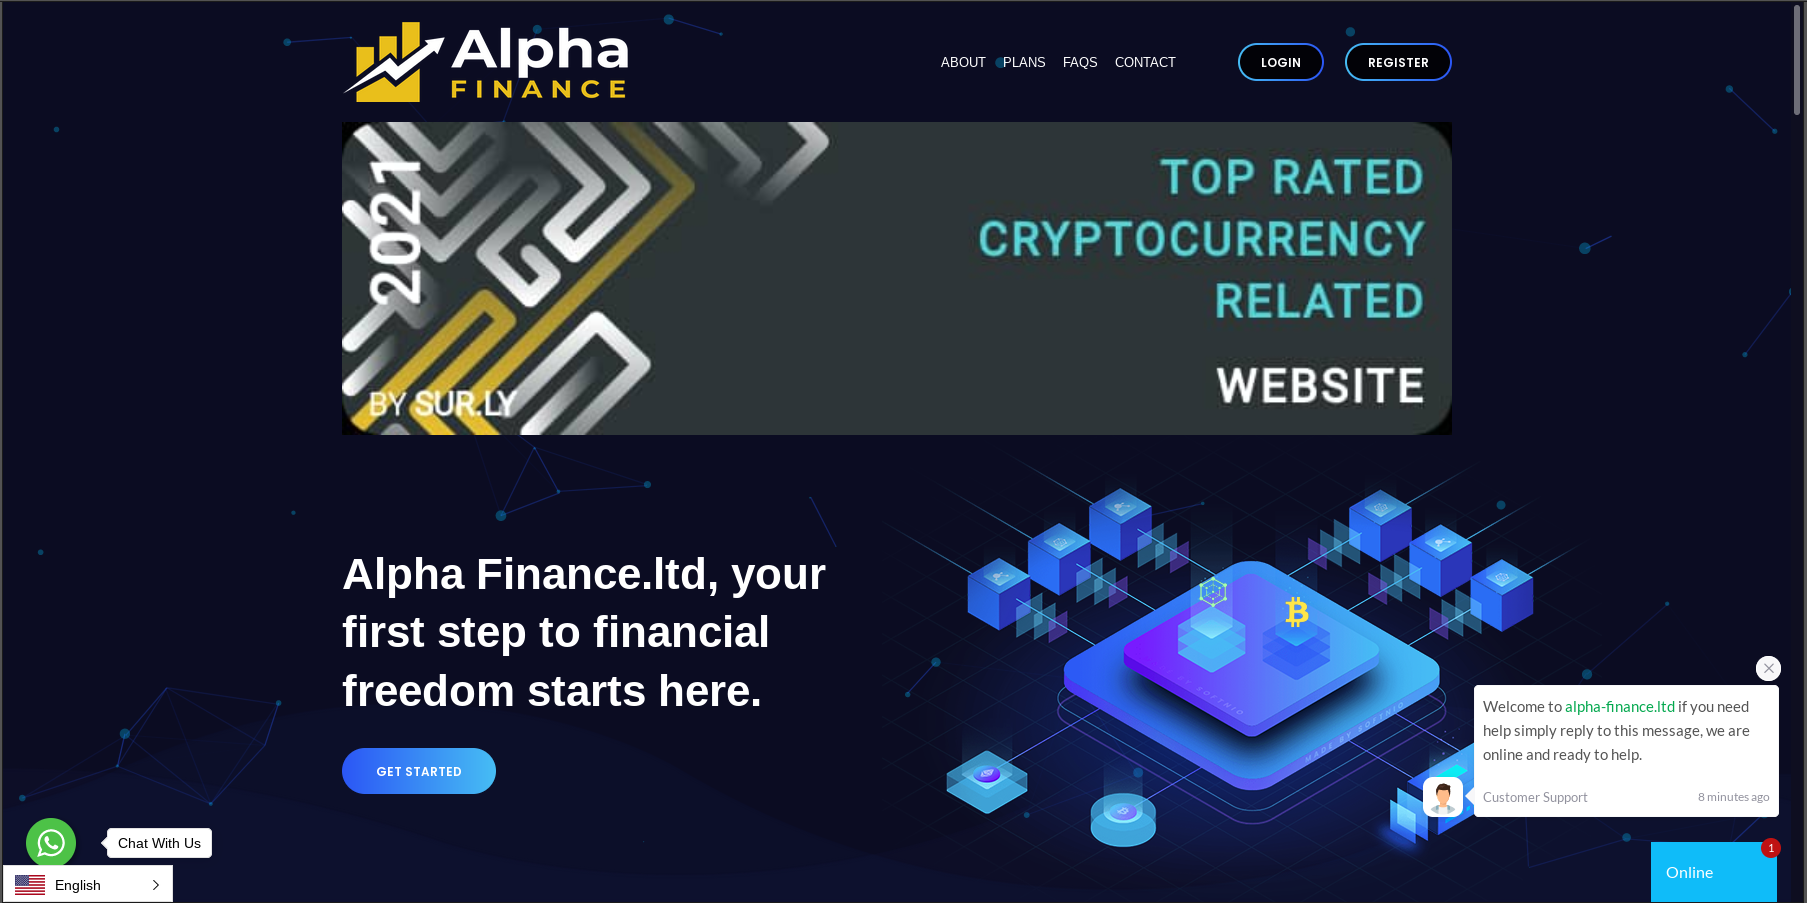 The Homepage of 'Alpha Finance', showing a clearly fake award banner